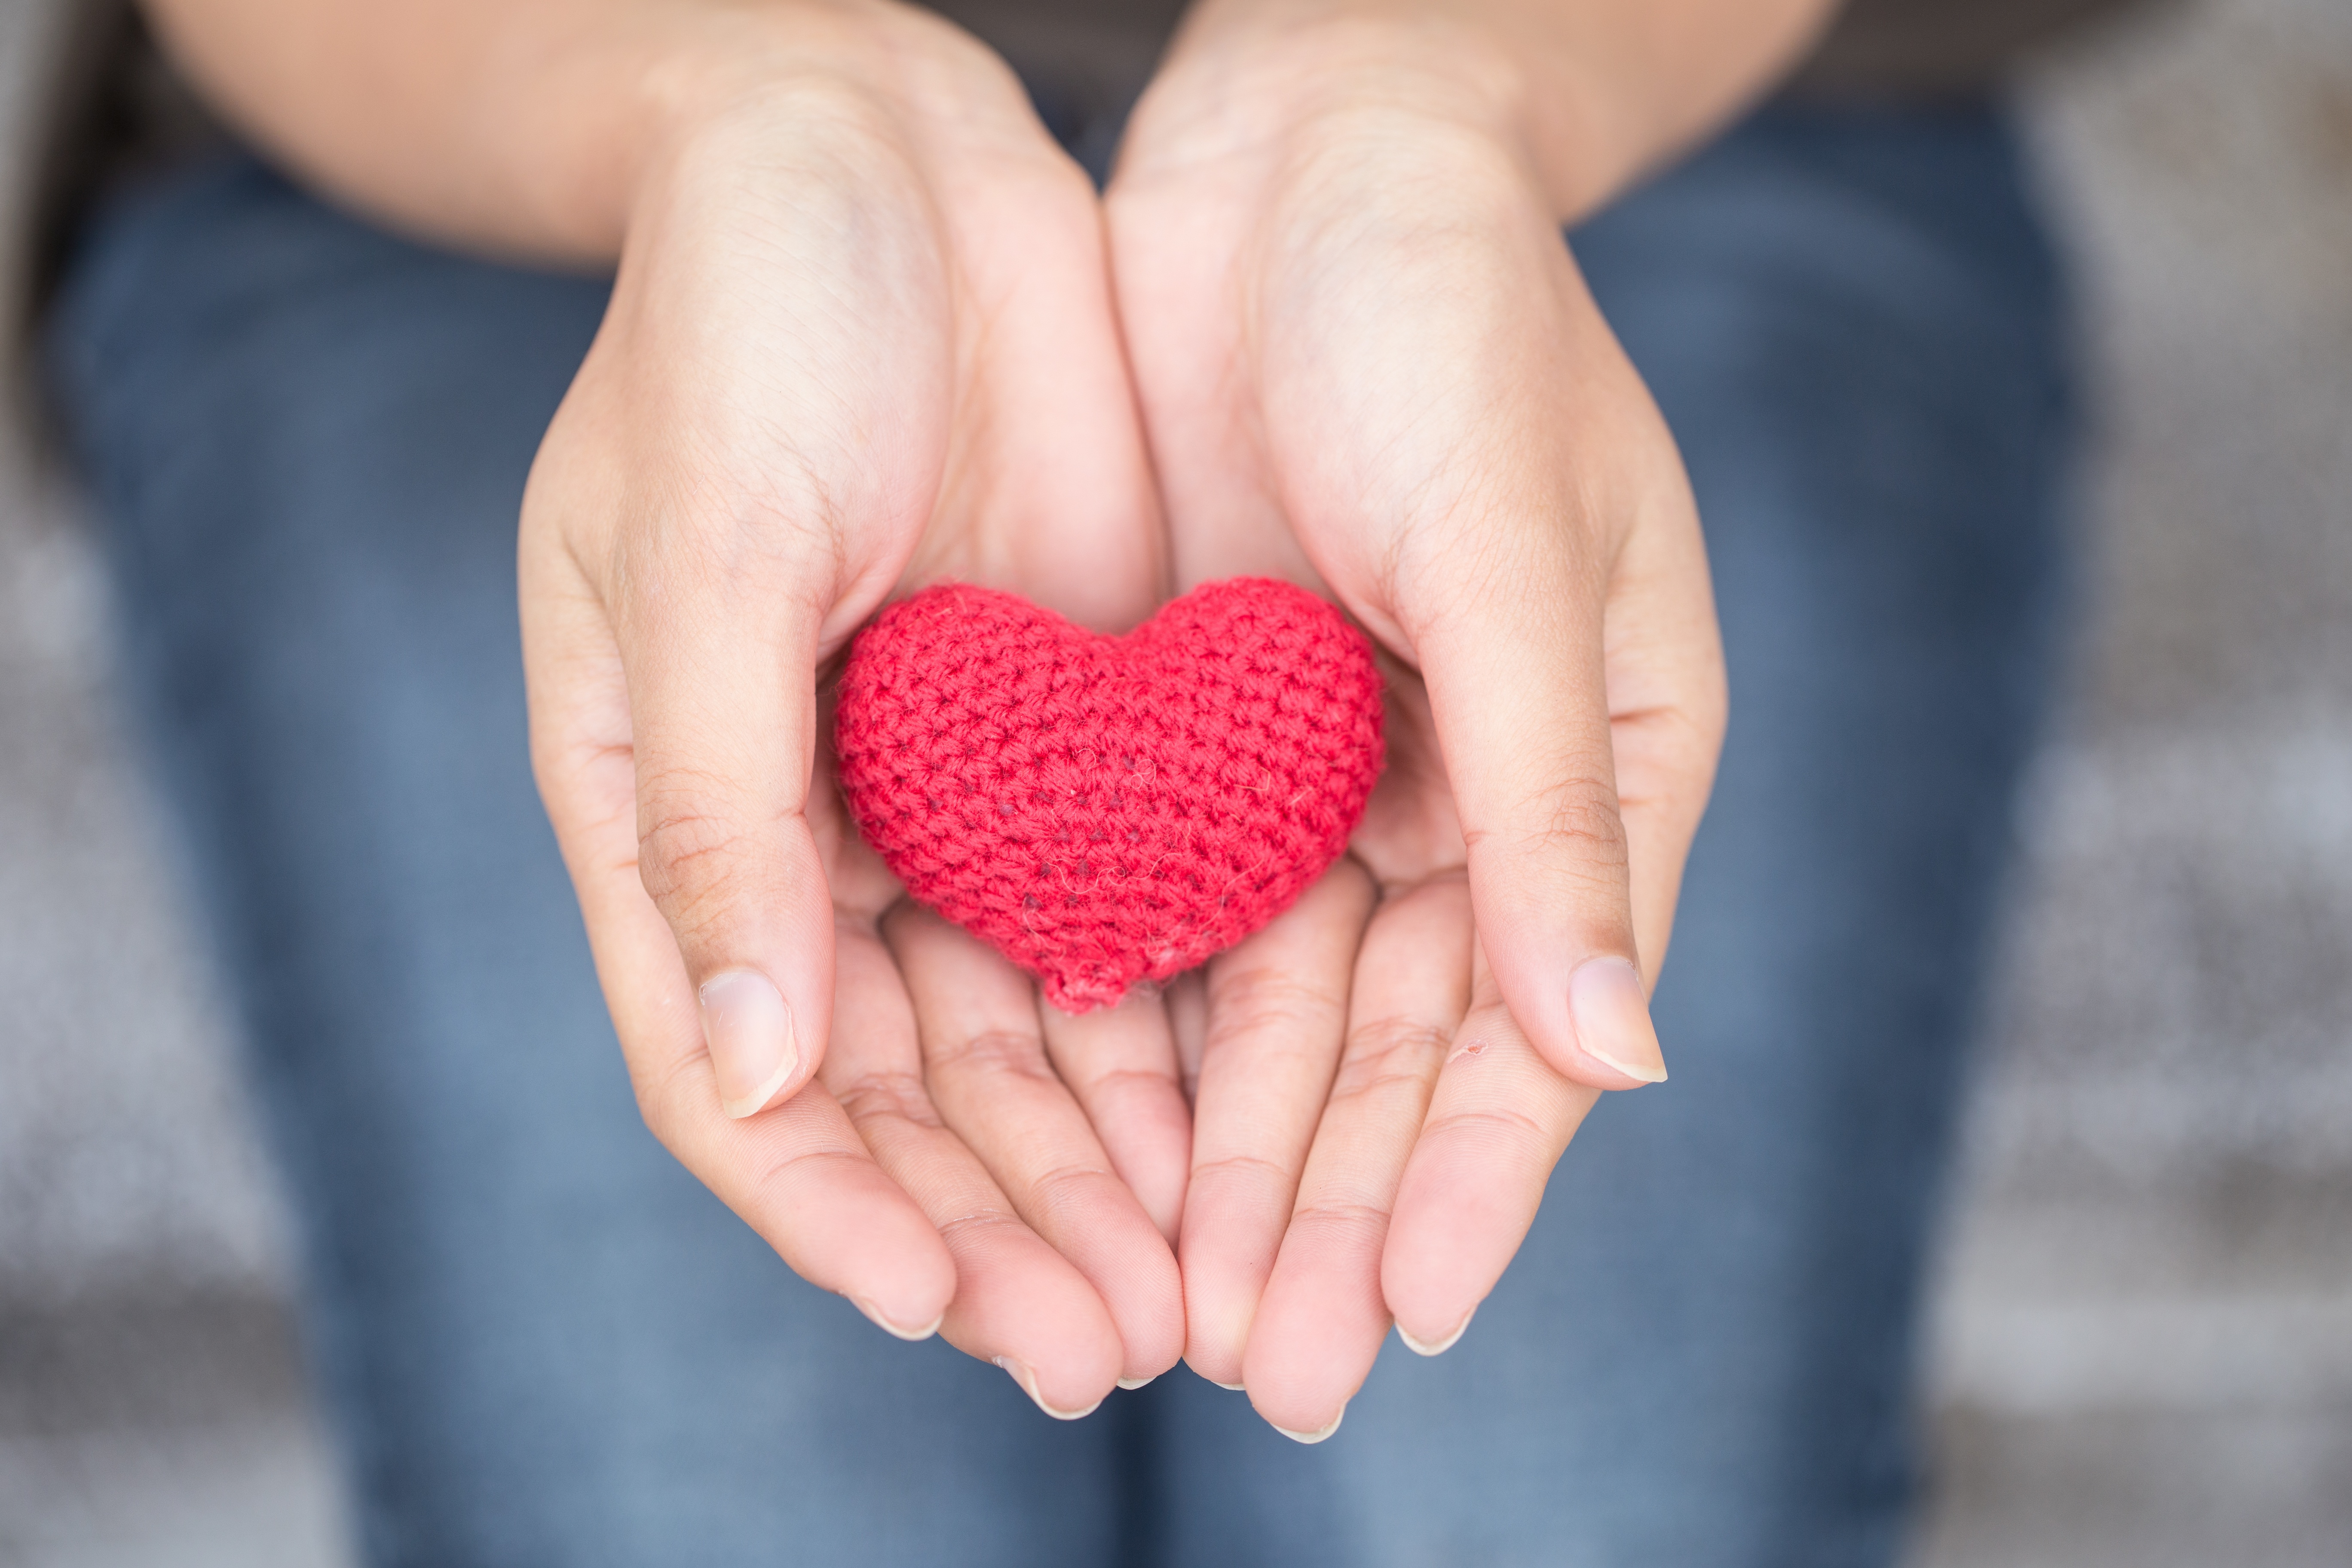 5 Steps to More Meaningful Giving